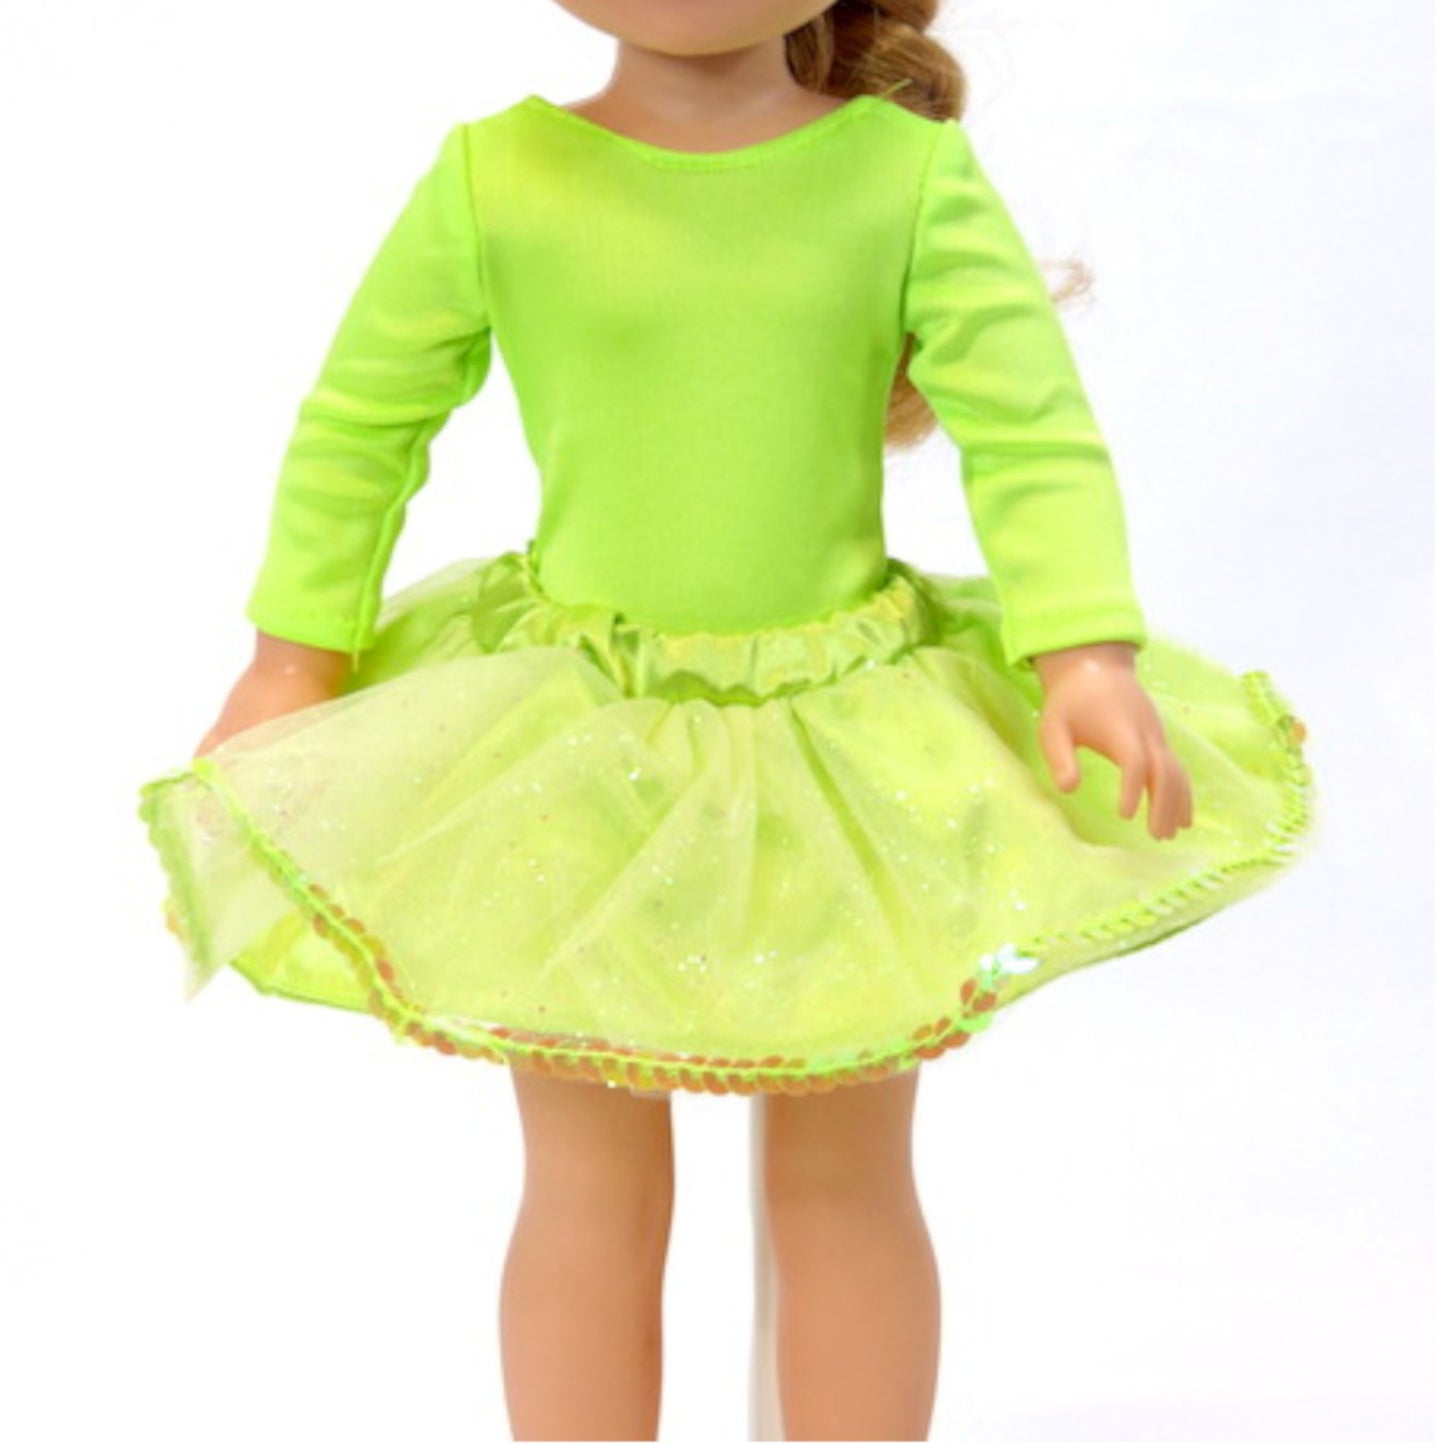 Sparkling Lime Green Dance Outfit with Shoes for 14 1/2-inch dolls with doll